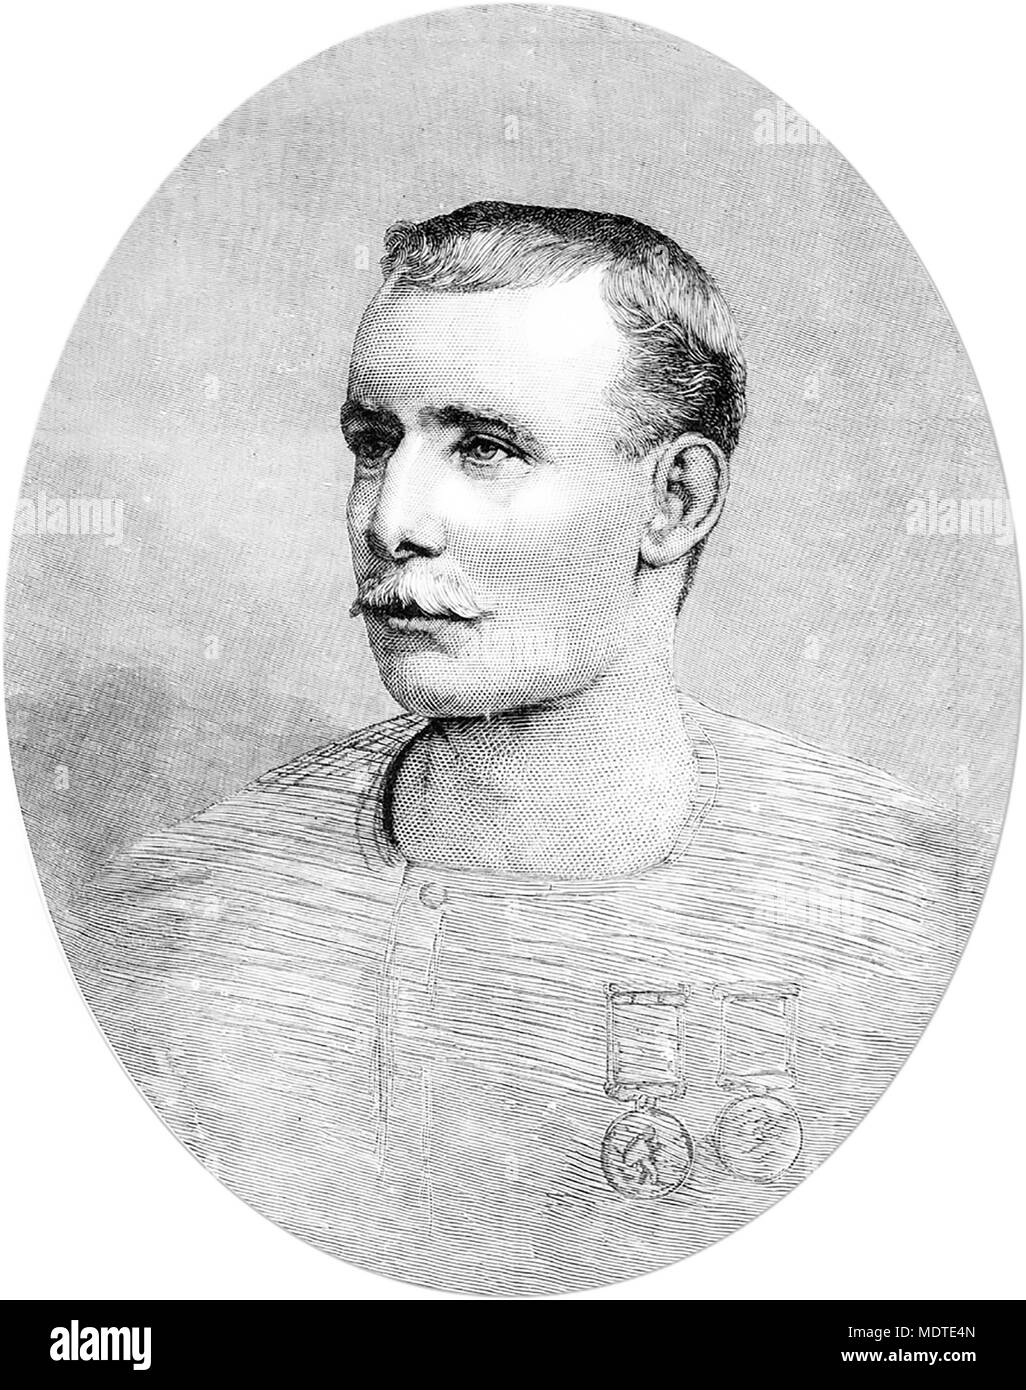 MATTHEW WEBB (1848-1883) First recorded person to swim the English Channel.  He did this on 25 August 1875. Portrait dates from 1883. Stock Photo